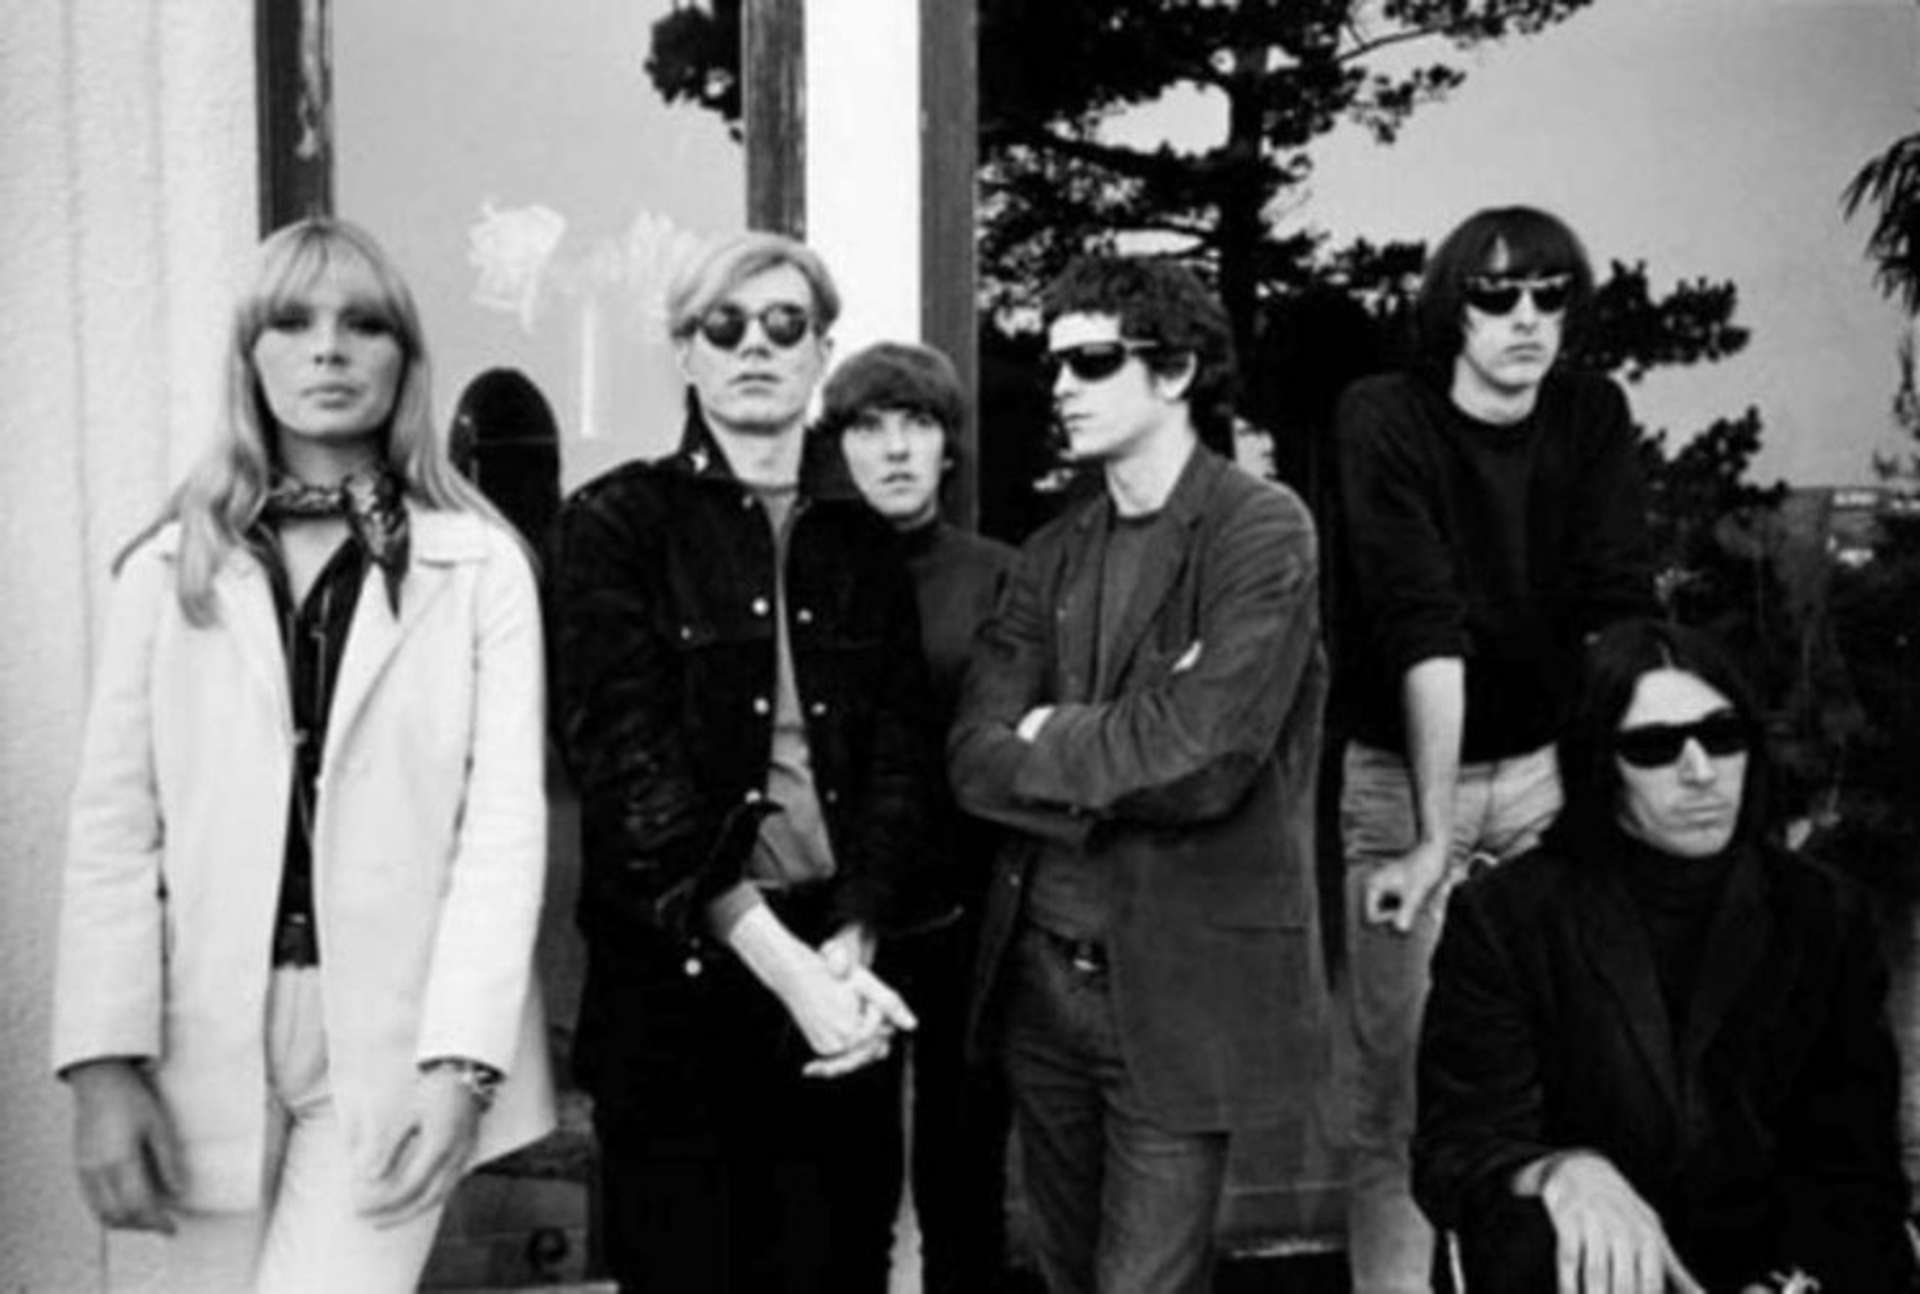 A black and white photograph of the band The Velvet Underground, singer Nico and artist Andy Warhol.